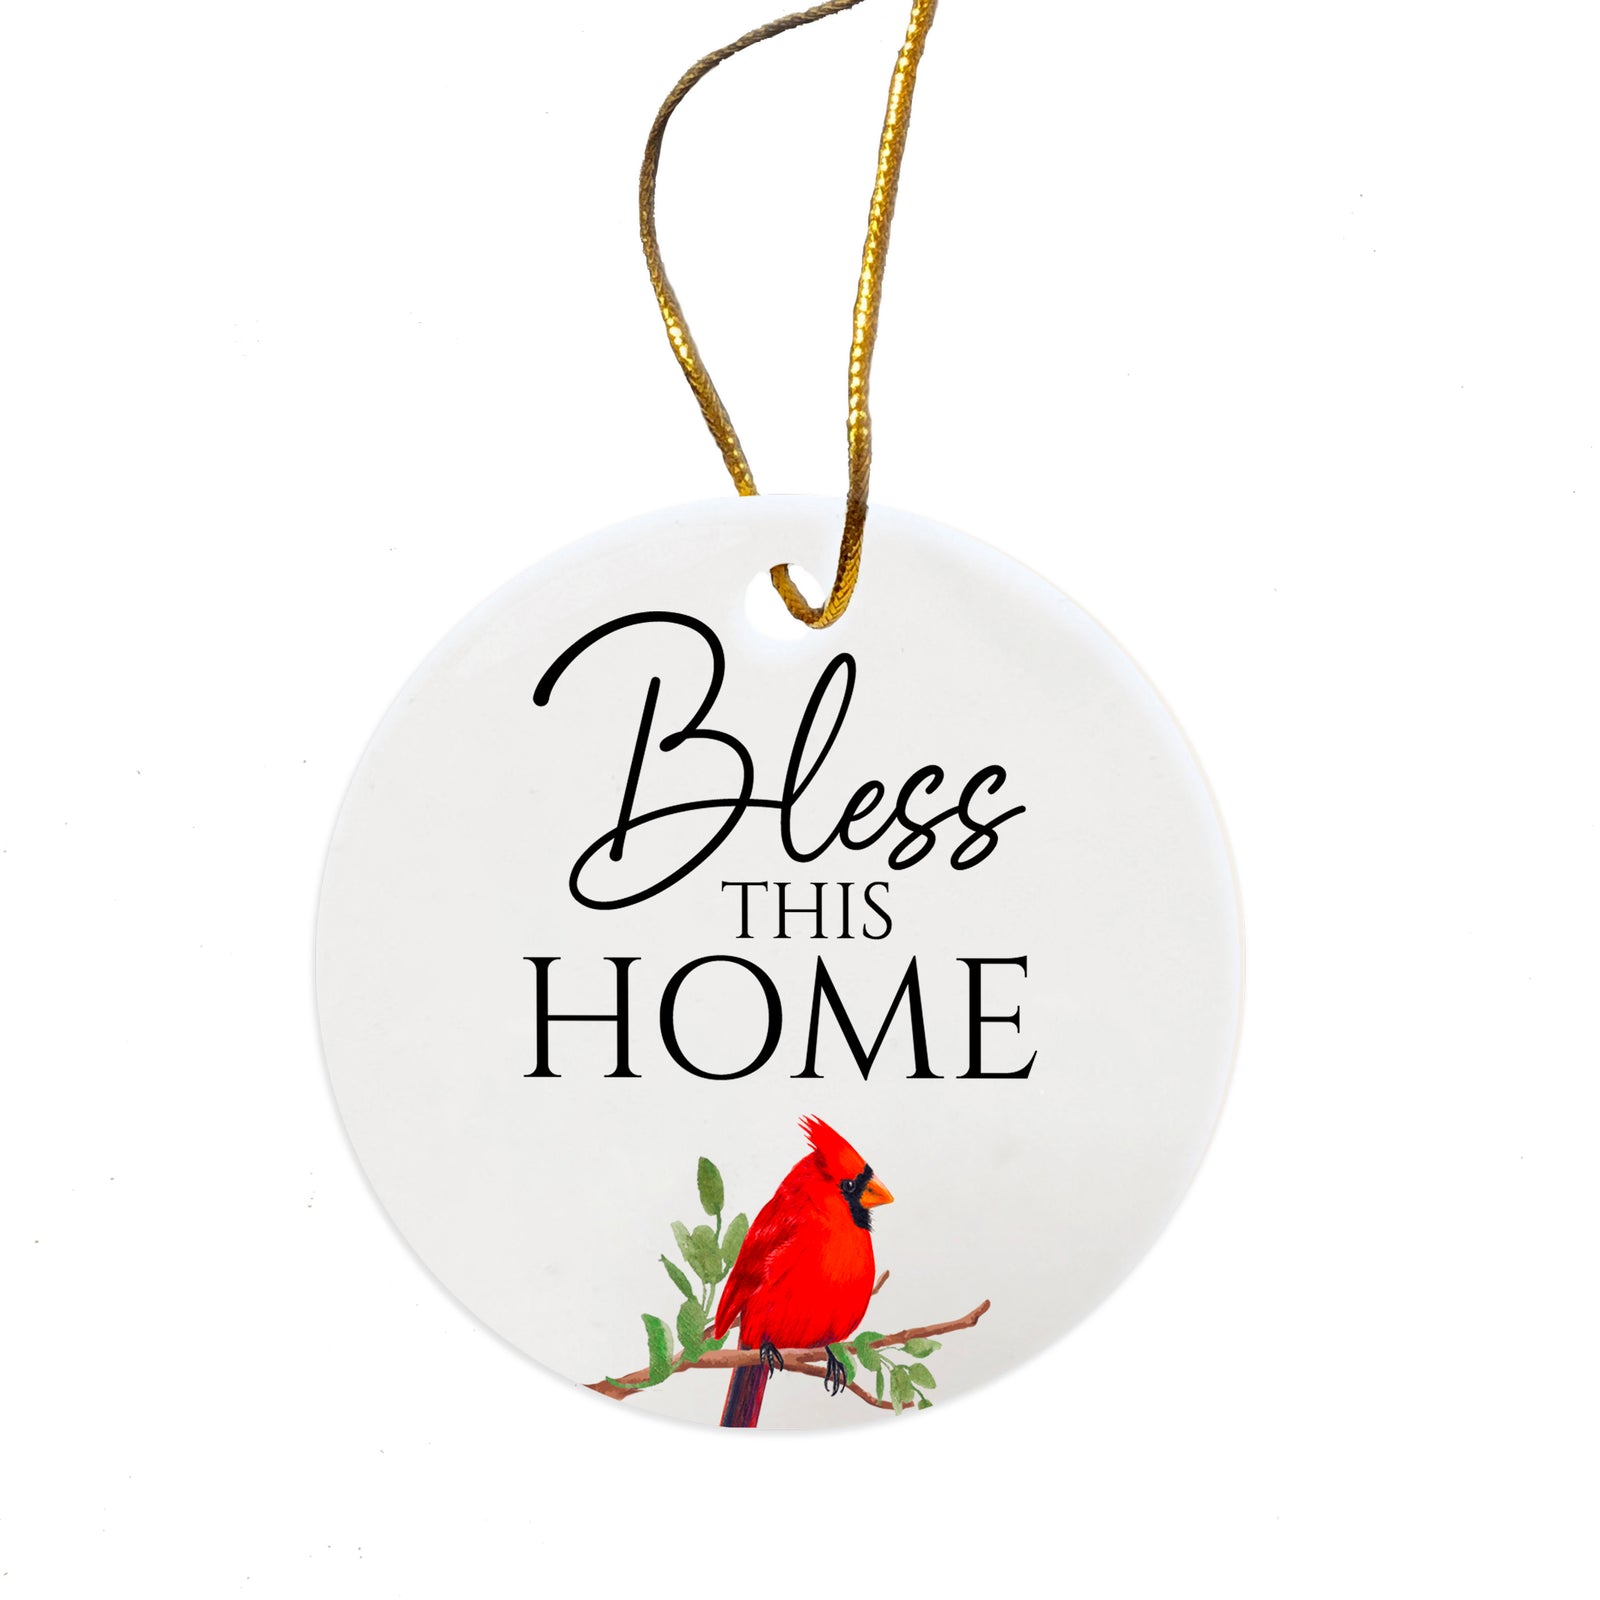 White Ceramic Cardinal Ornament With Everyday Verses Gift Ideas - Bless This Home